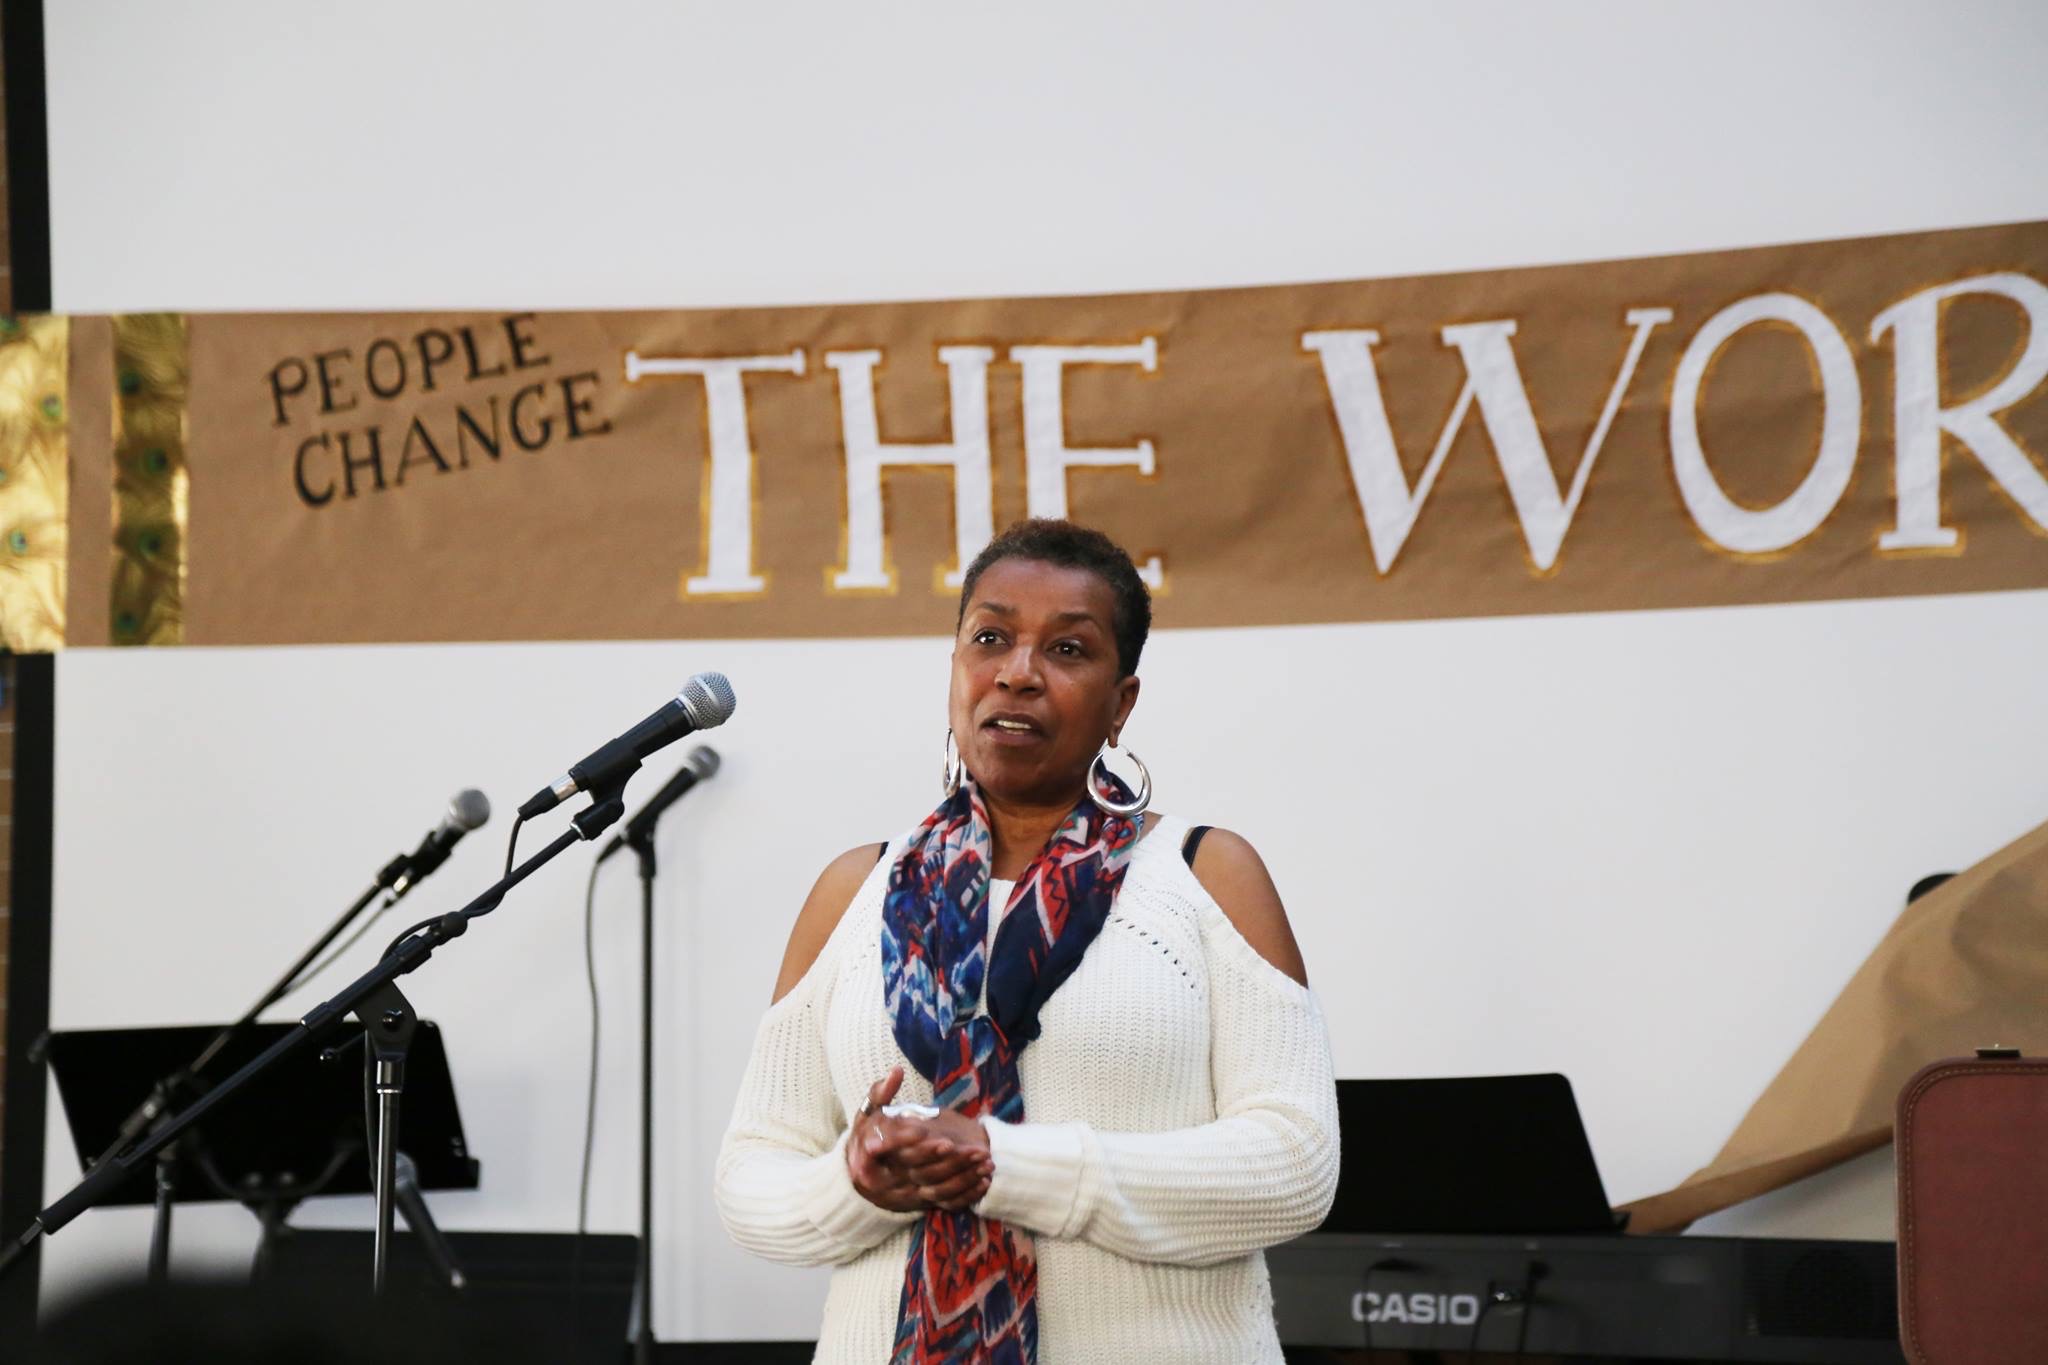 Patricia Vickers speaks at 'People Change, People Change The World'